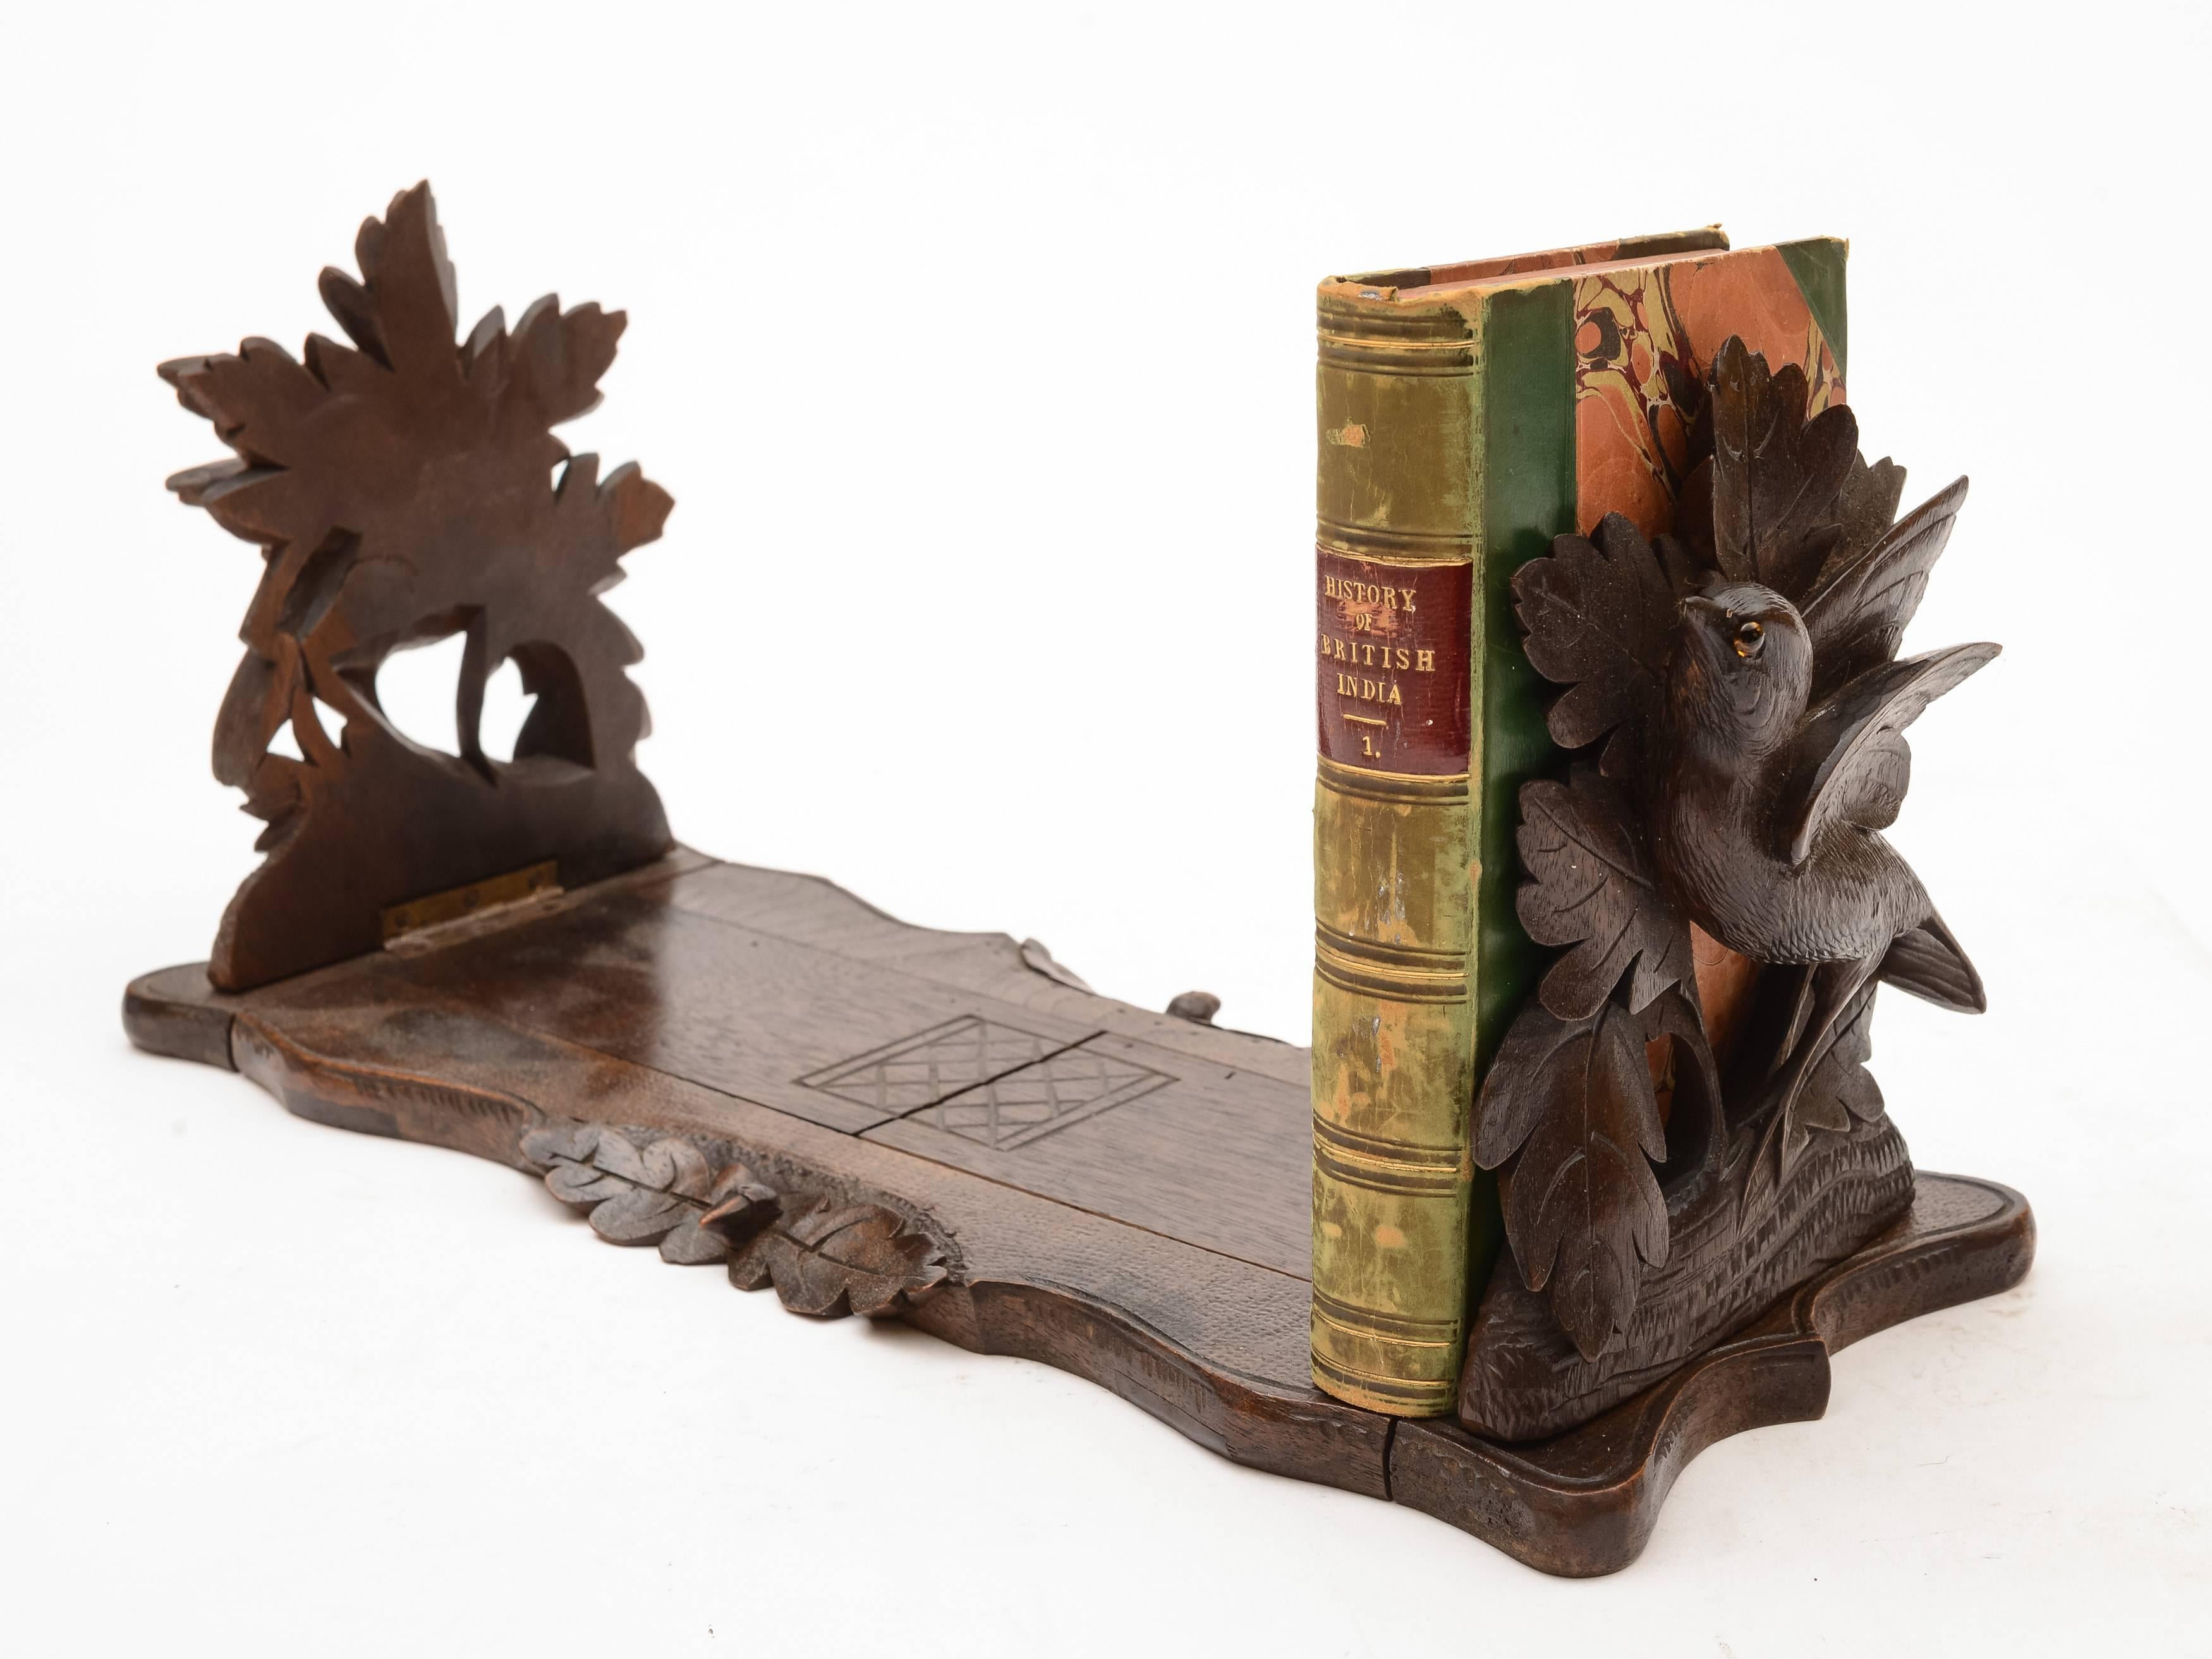 A gorgeous black forest carved sliding book rack with birds on tree branches to either end - birds have glass eyes. Circa 1900.

FREE worldwide delivery. 

Measurements:
Height (standing): 6 1/4" (approx 15.5cm)
Width: 5 1/4" (approx